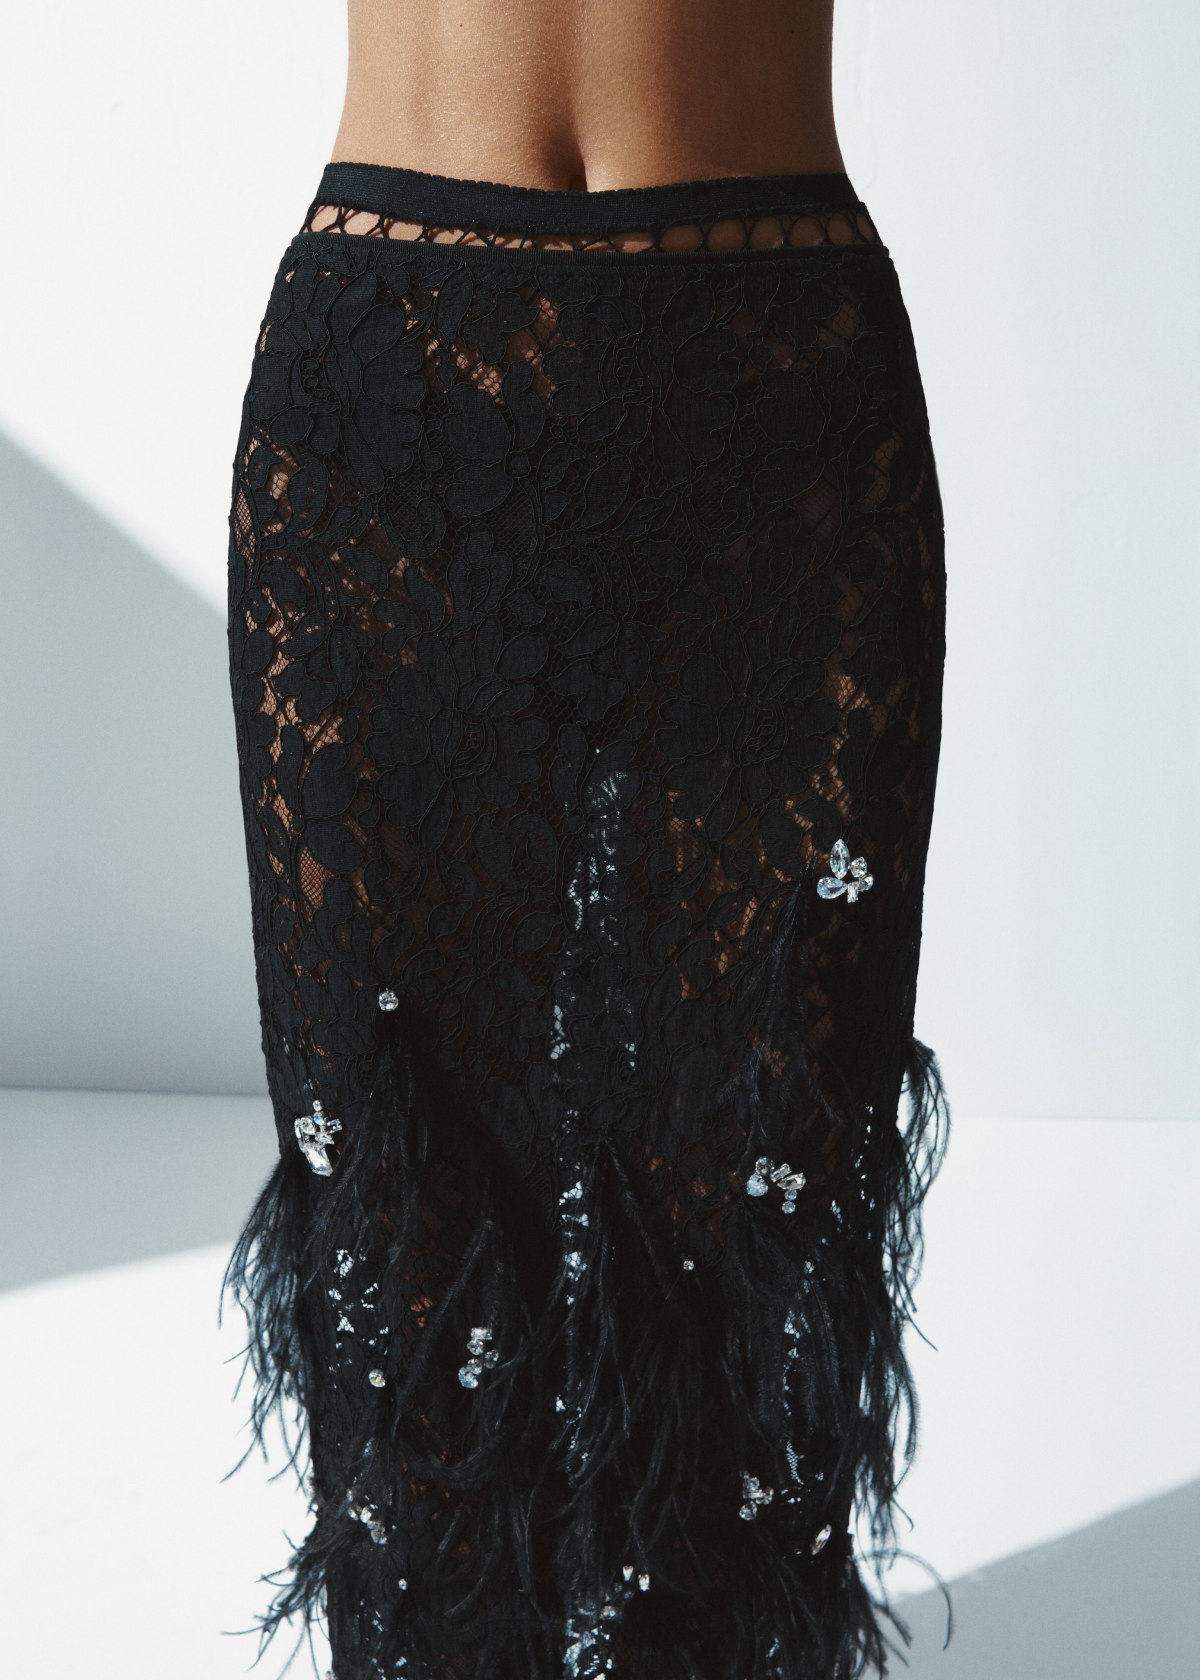 Lace skirt